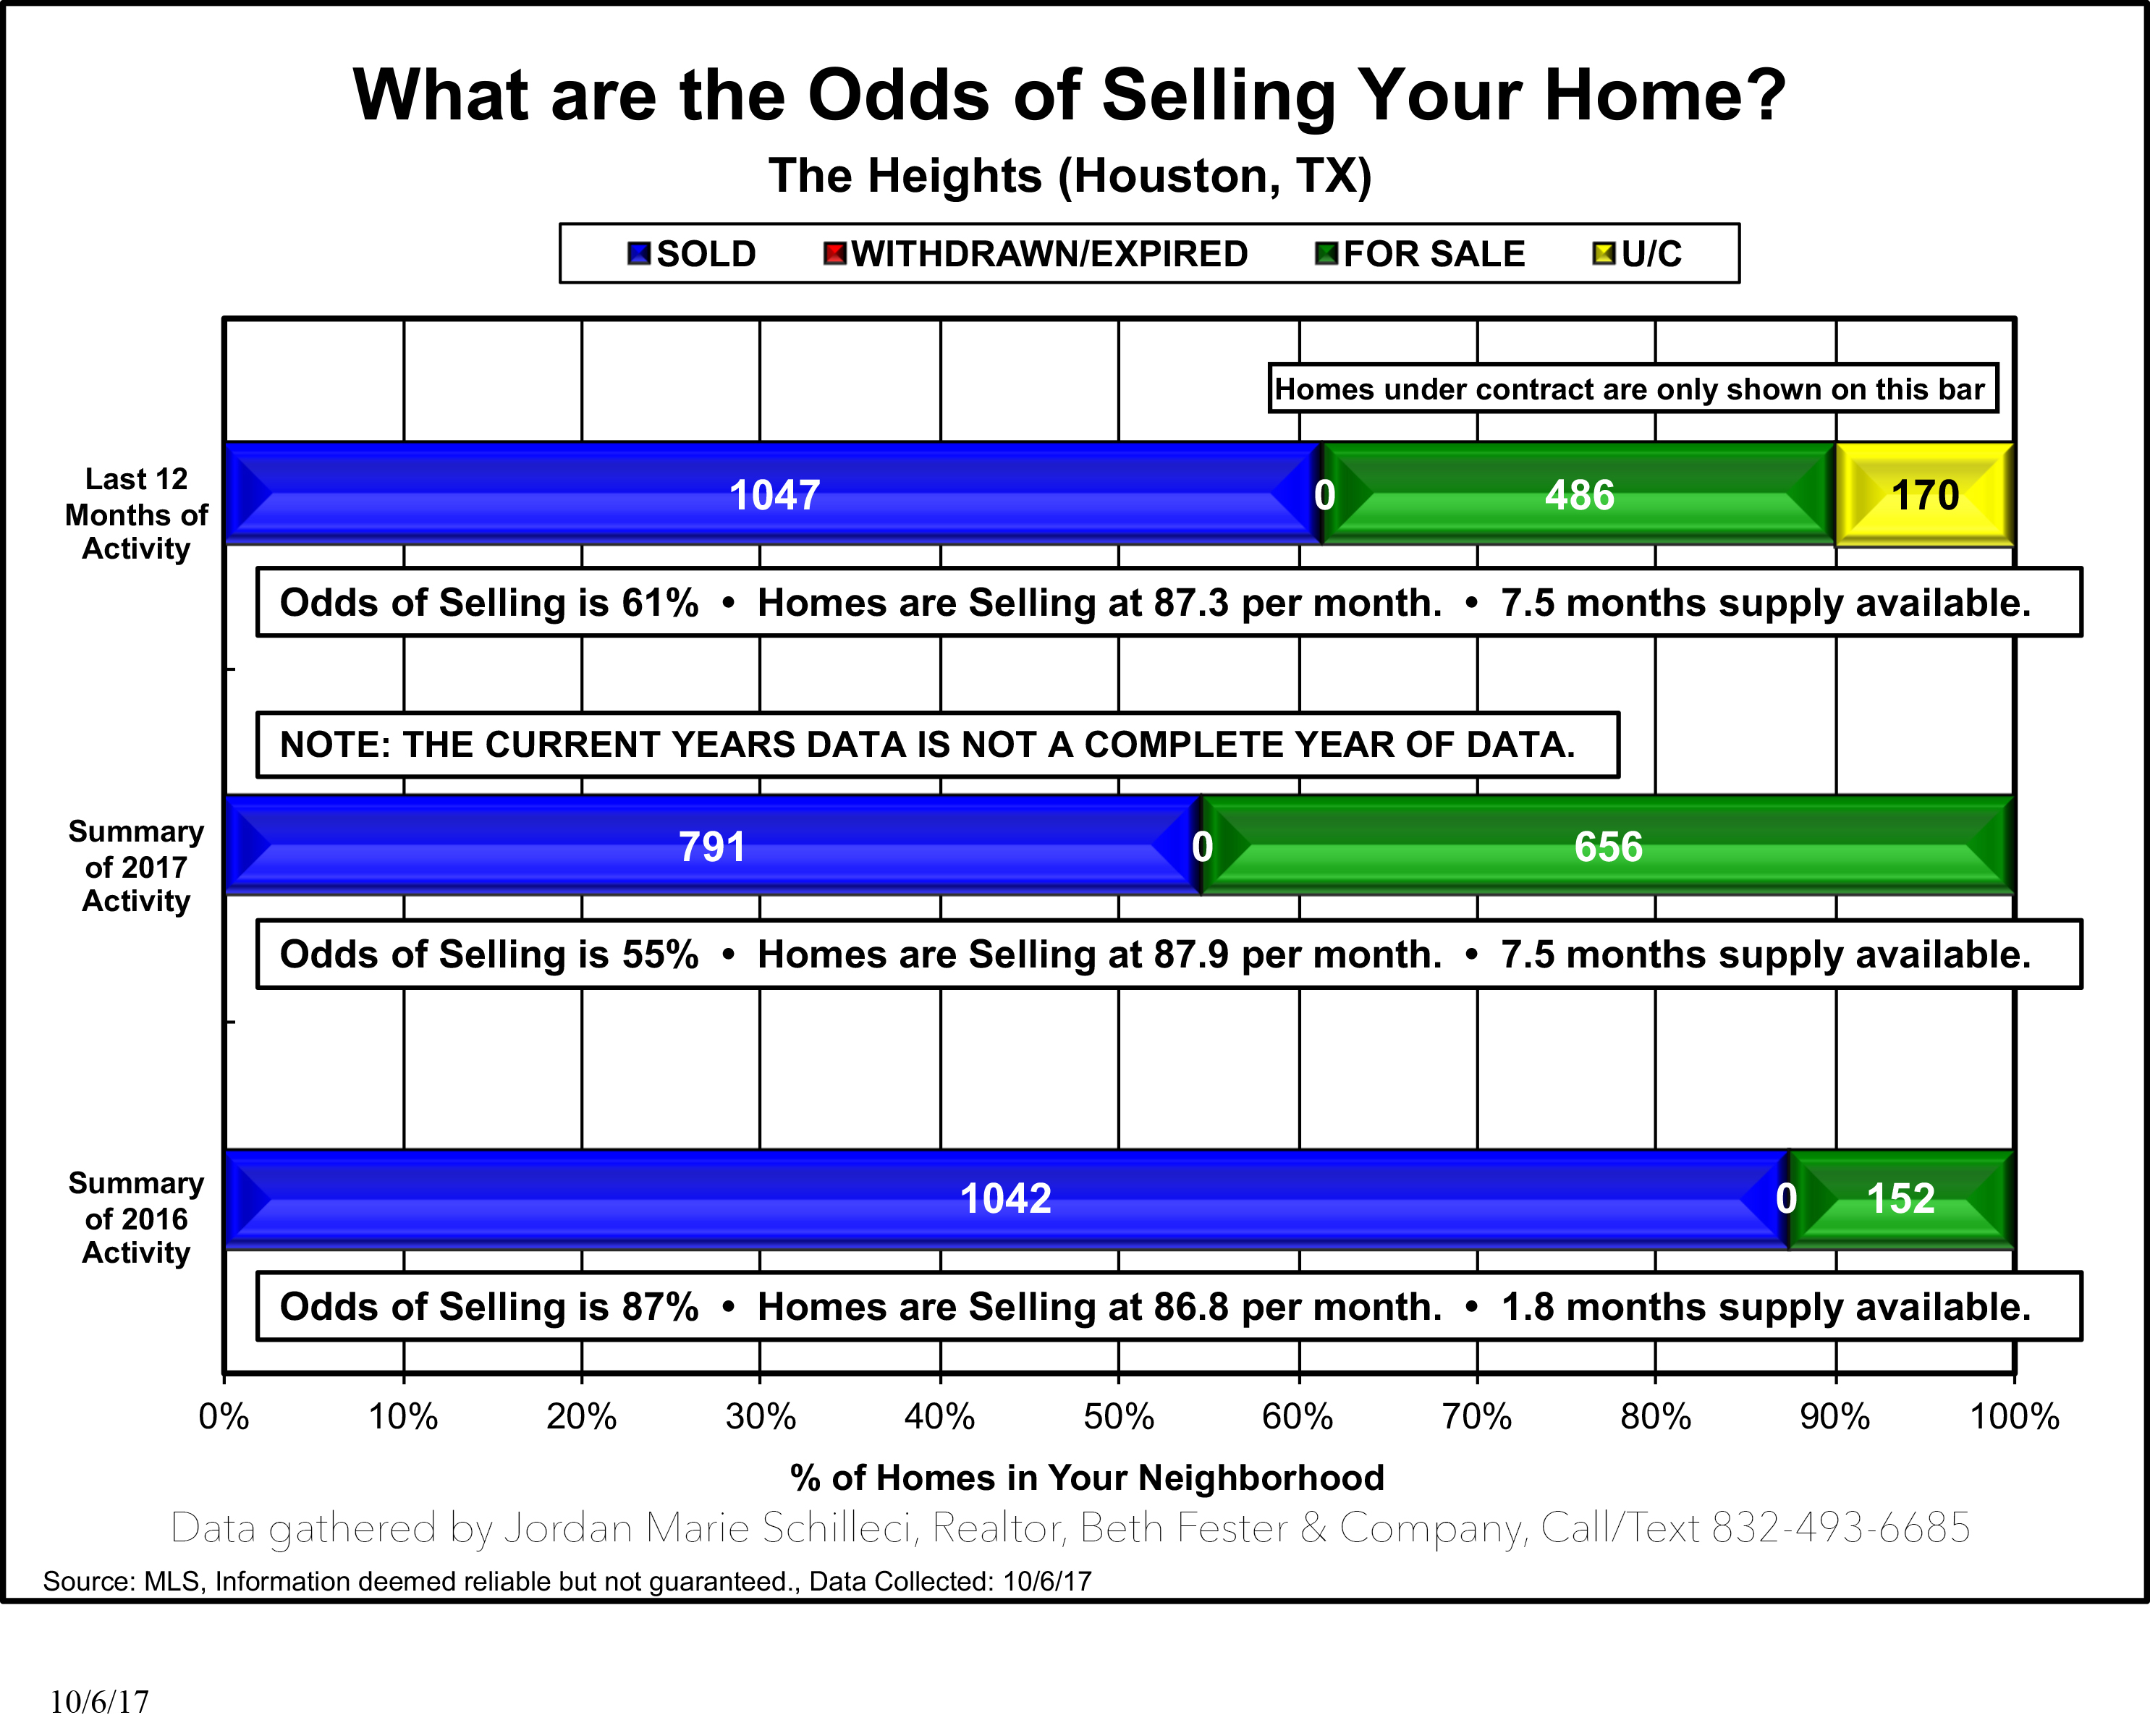 The Heights - What are the odds of selling your home?